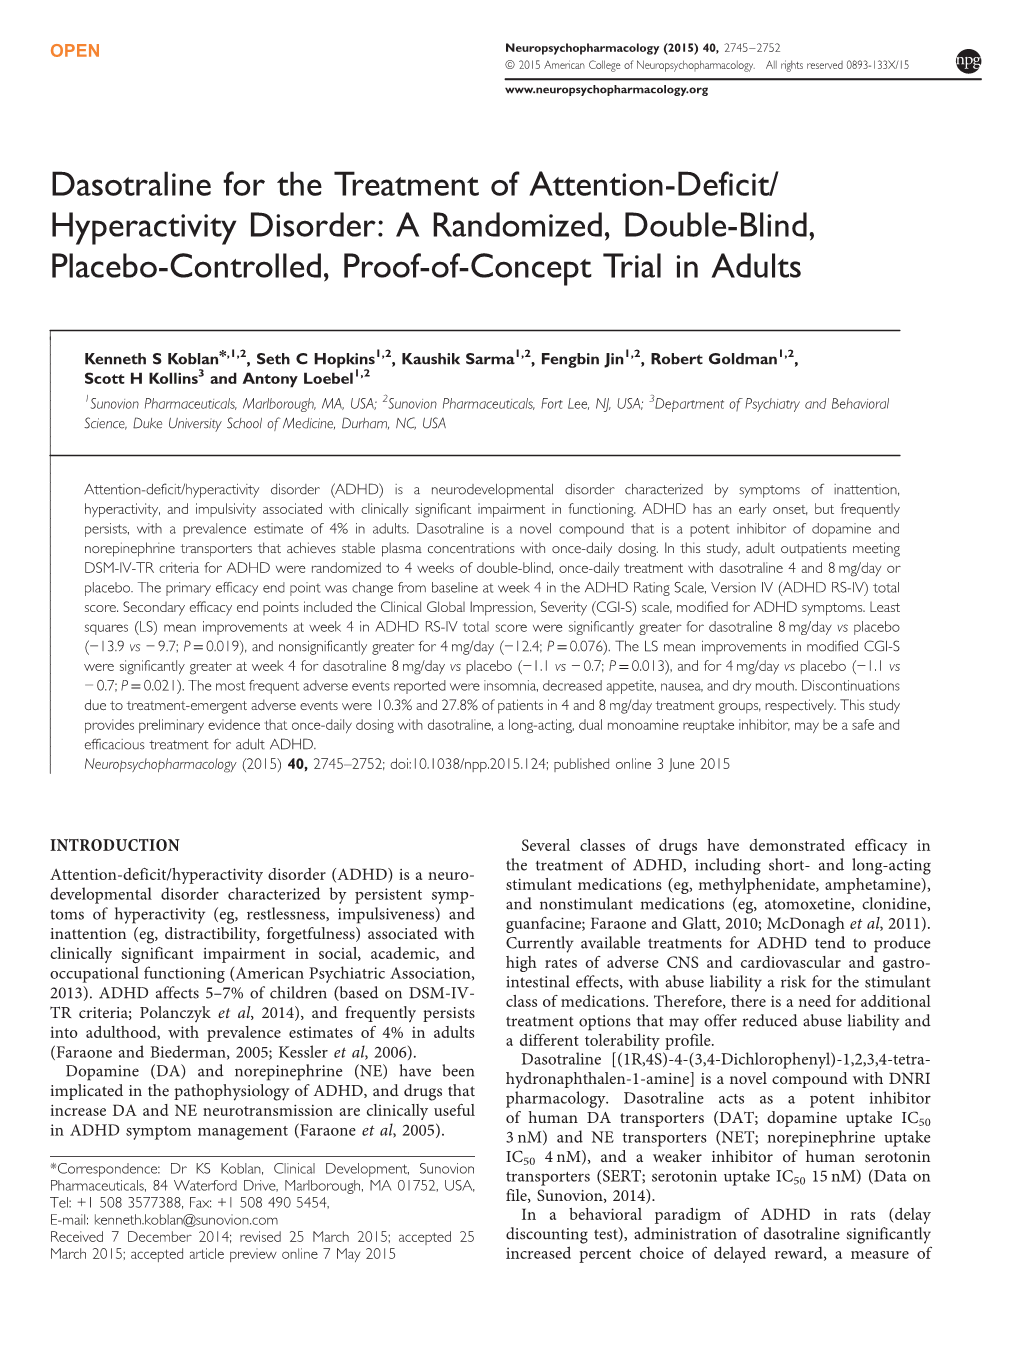 Hyperactivity Disorder: a Randomized, Double-Blind, Placebo-Controlled, Proof-Of-Concept Trial in Adults